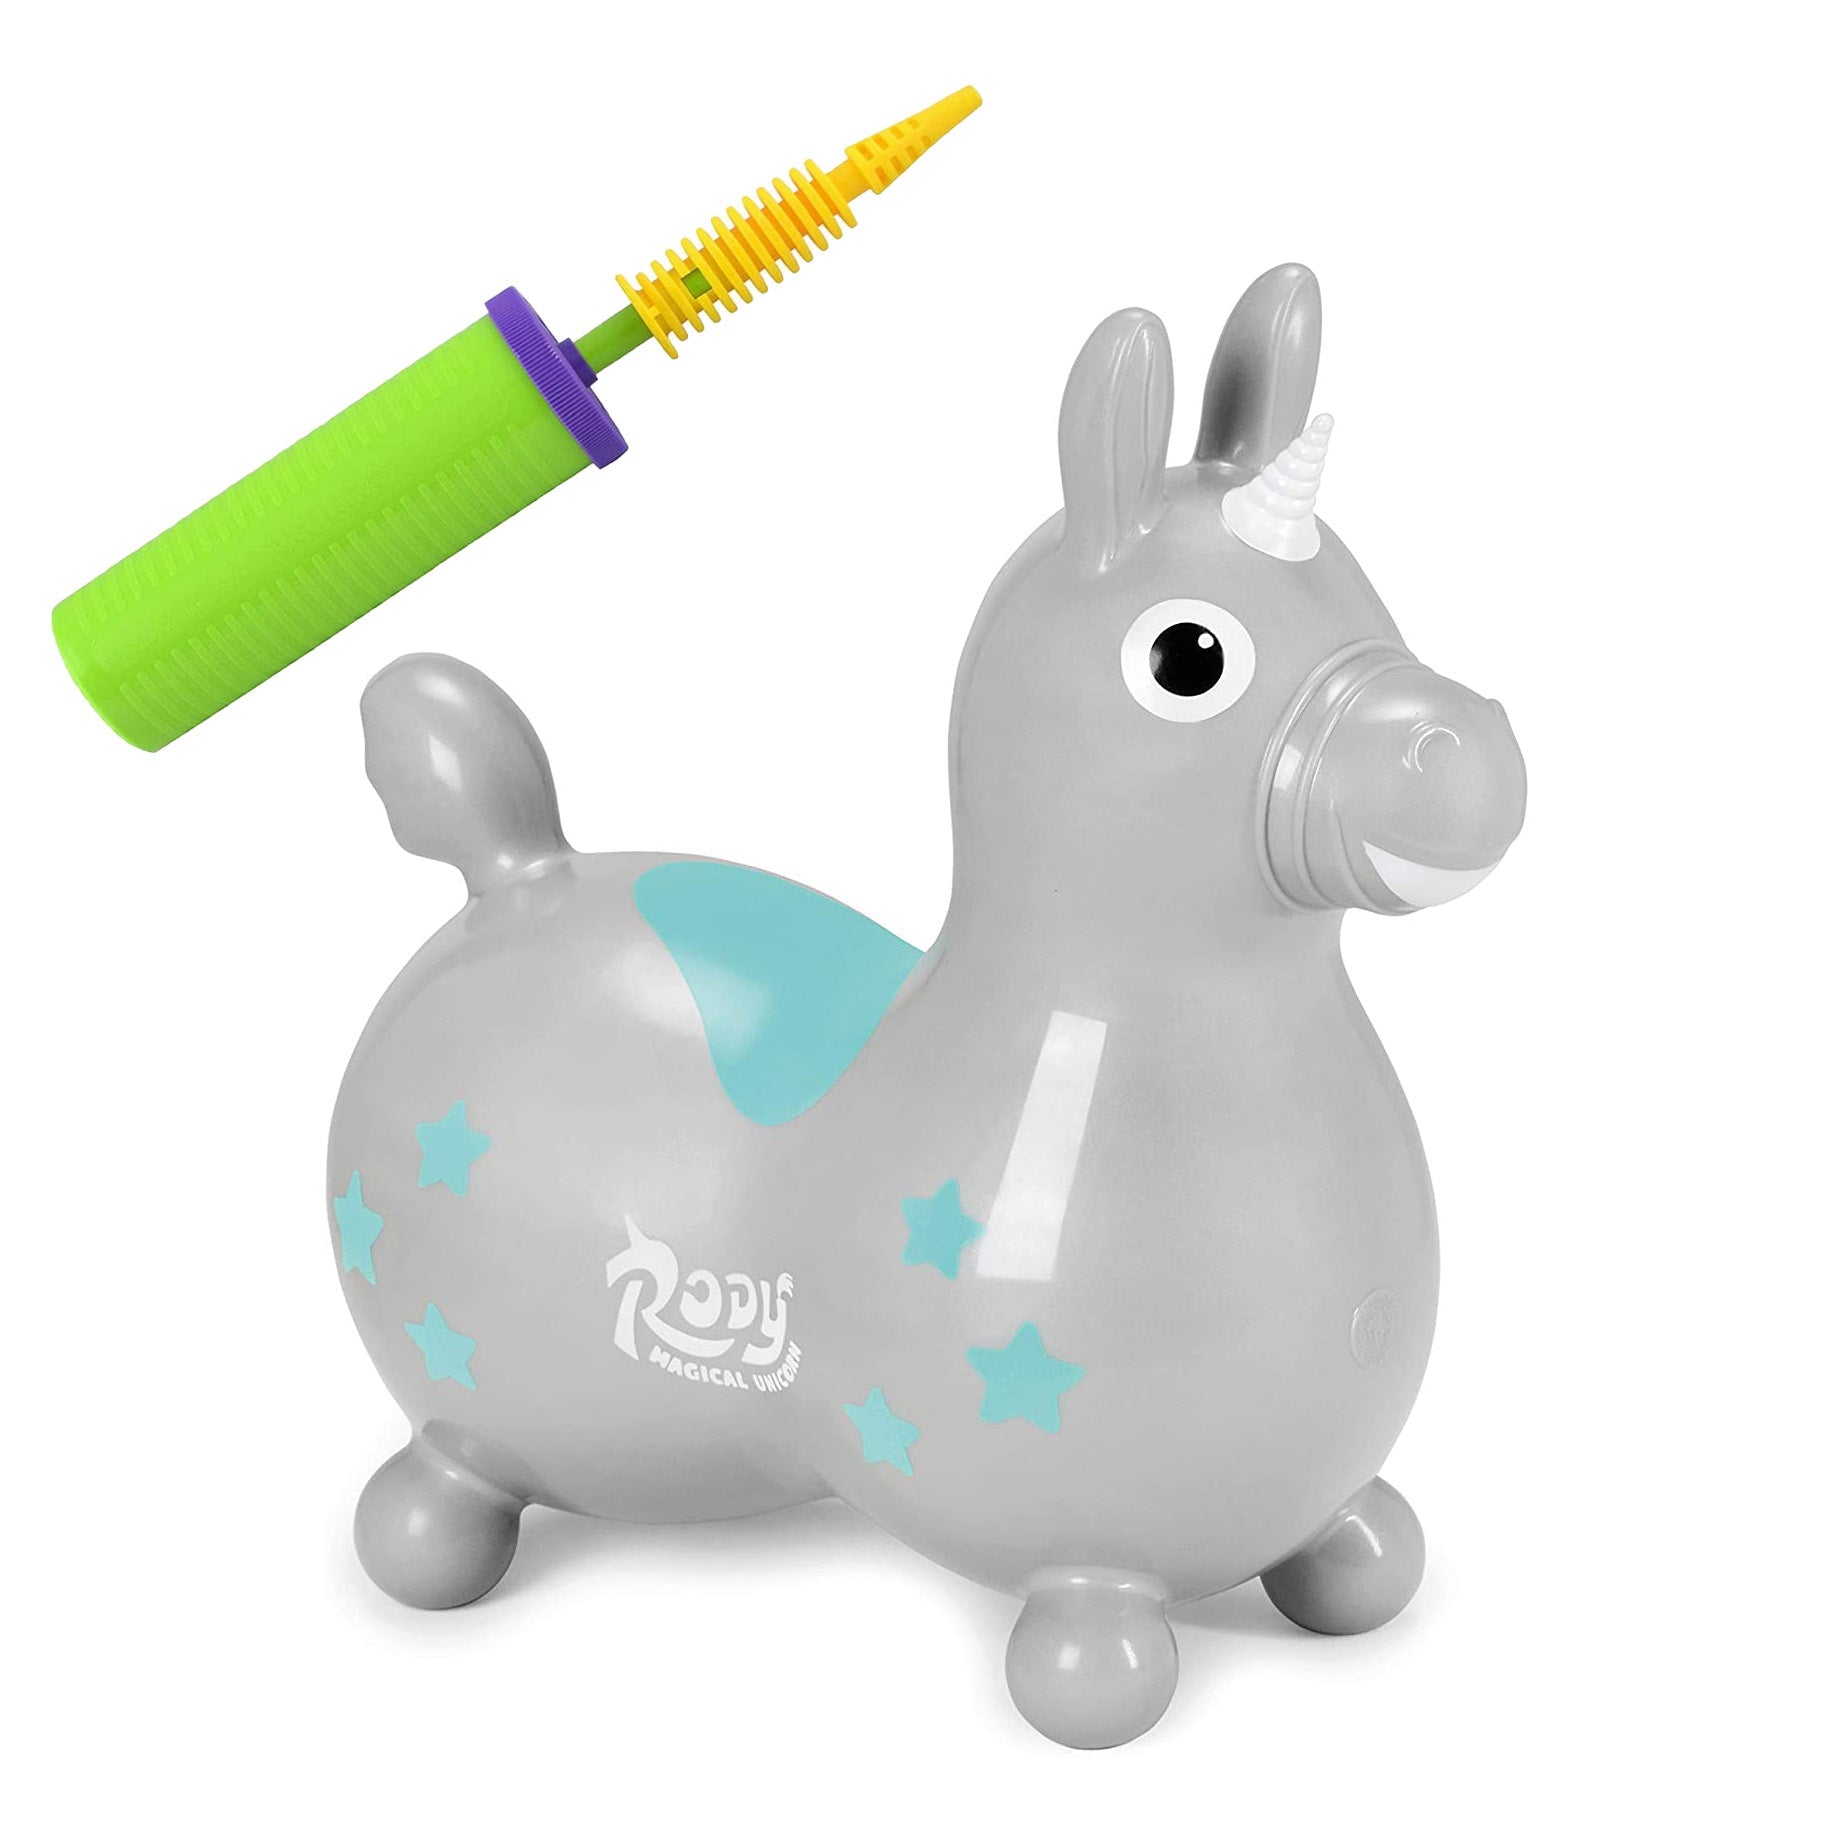 Studio image of the gray Rody Magical Unicorn and the air pump that comes with it.